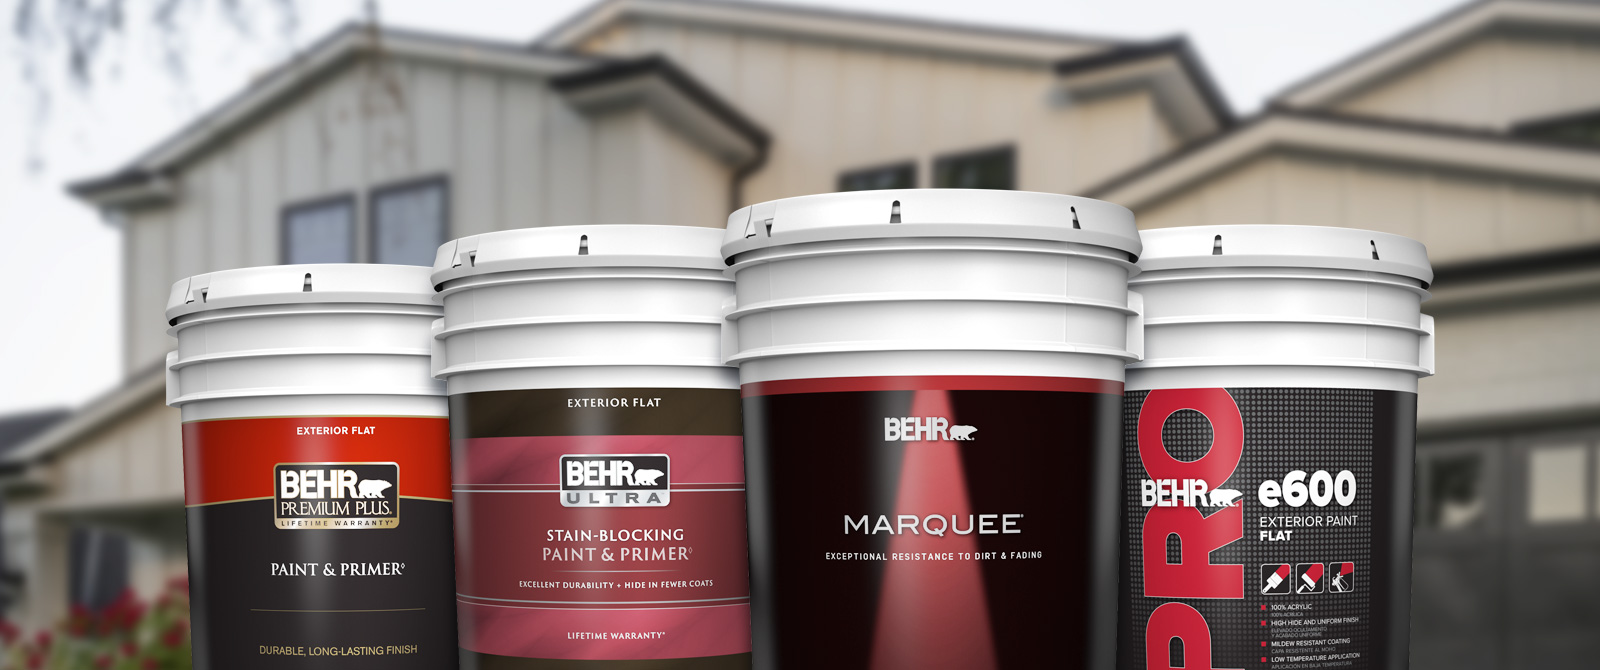 Behr Pro exterior products landing page desktop image featuring 5 gallon cans.